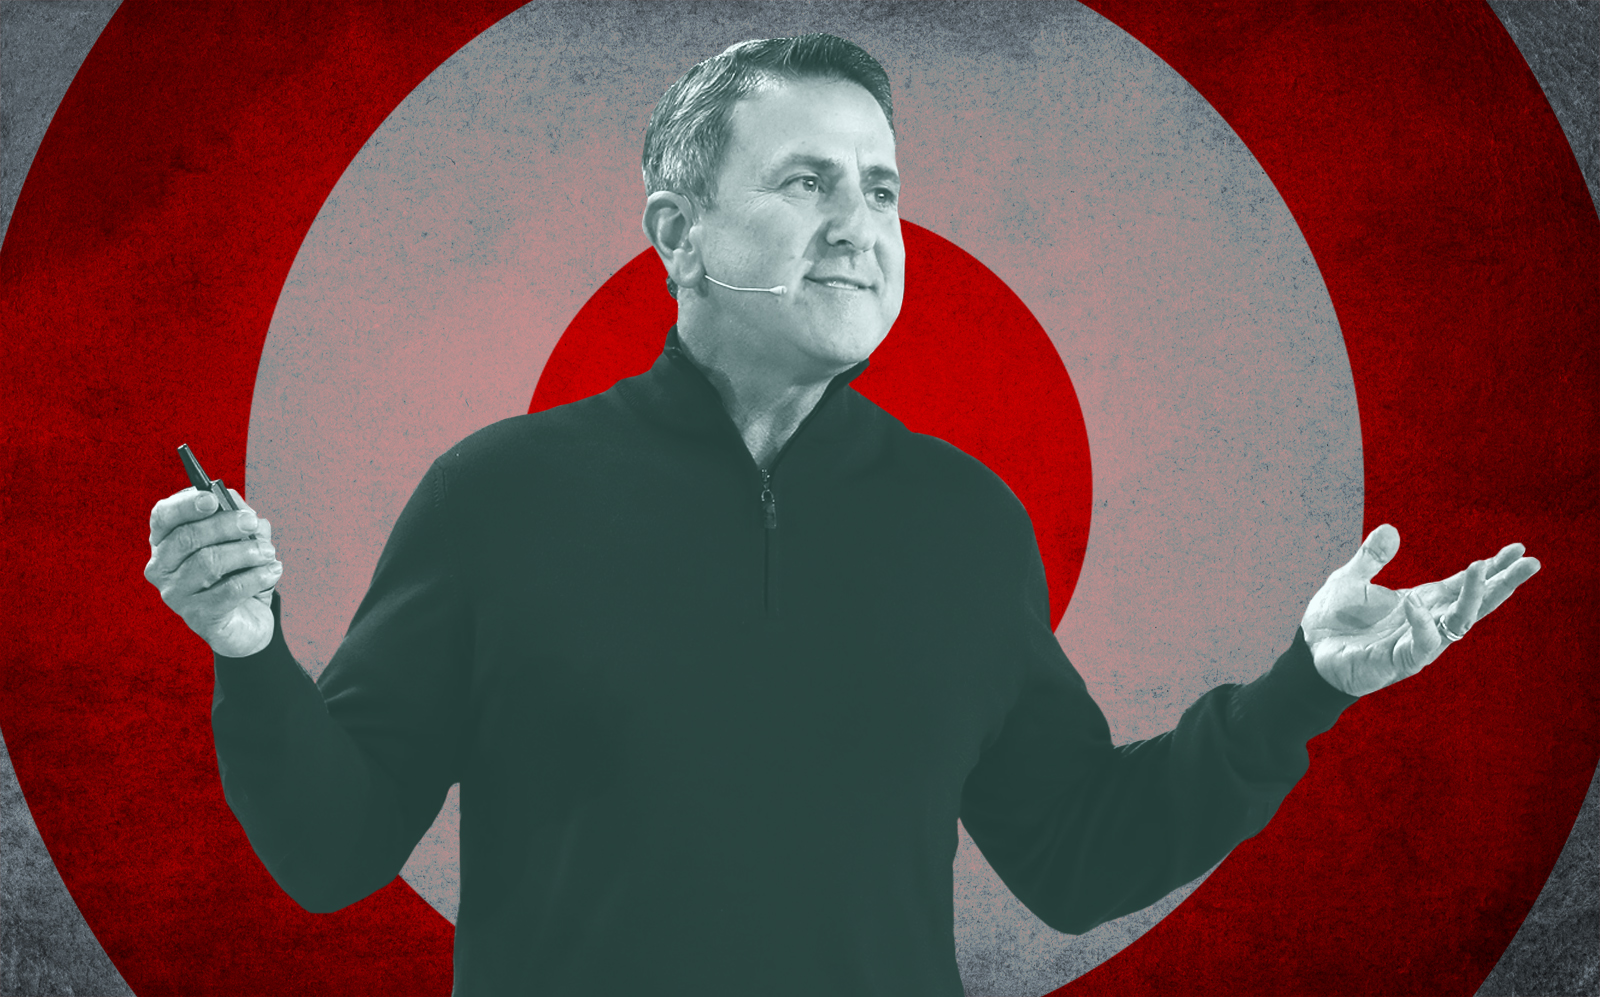 Target CEO Brian Cornell. (Getty)